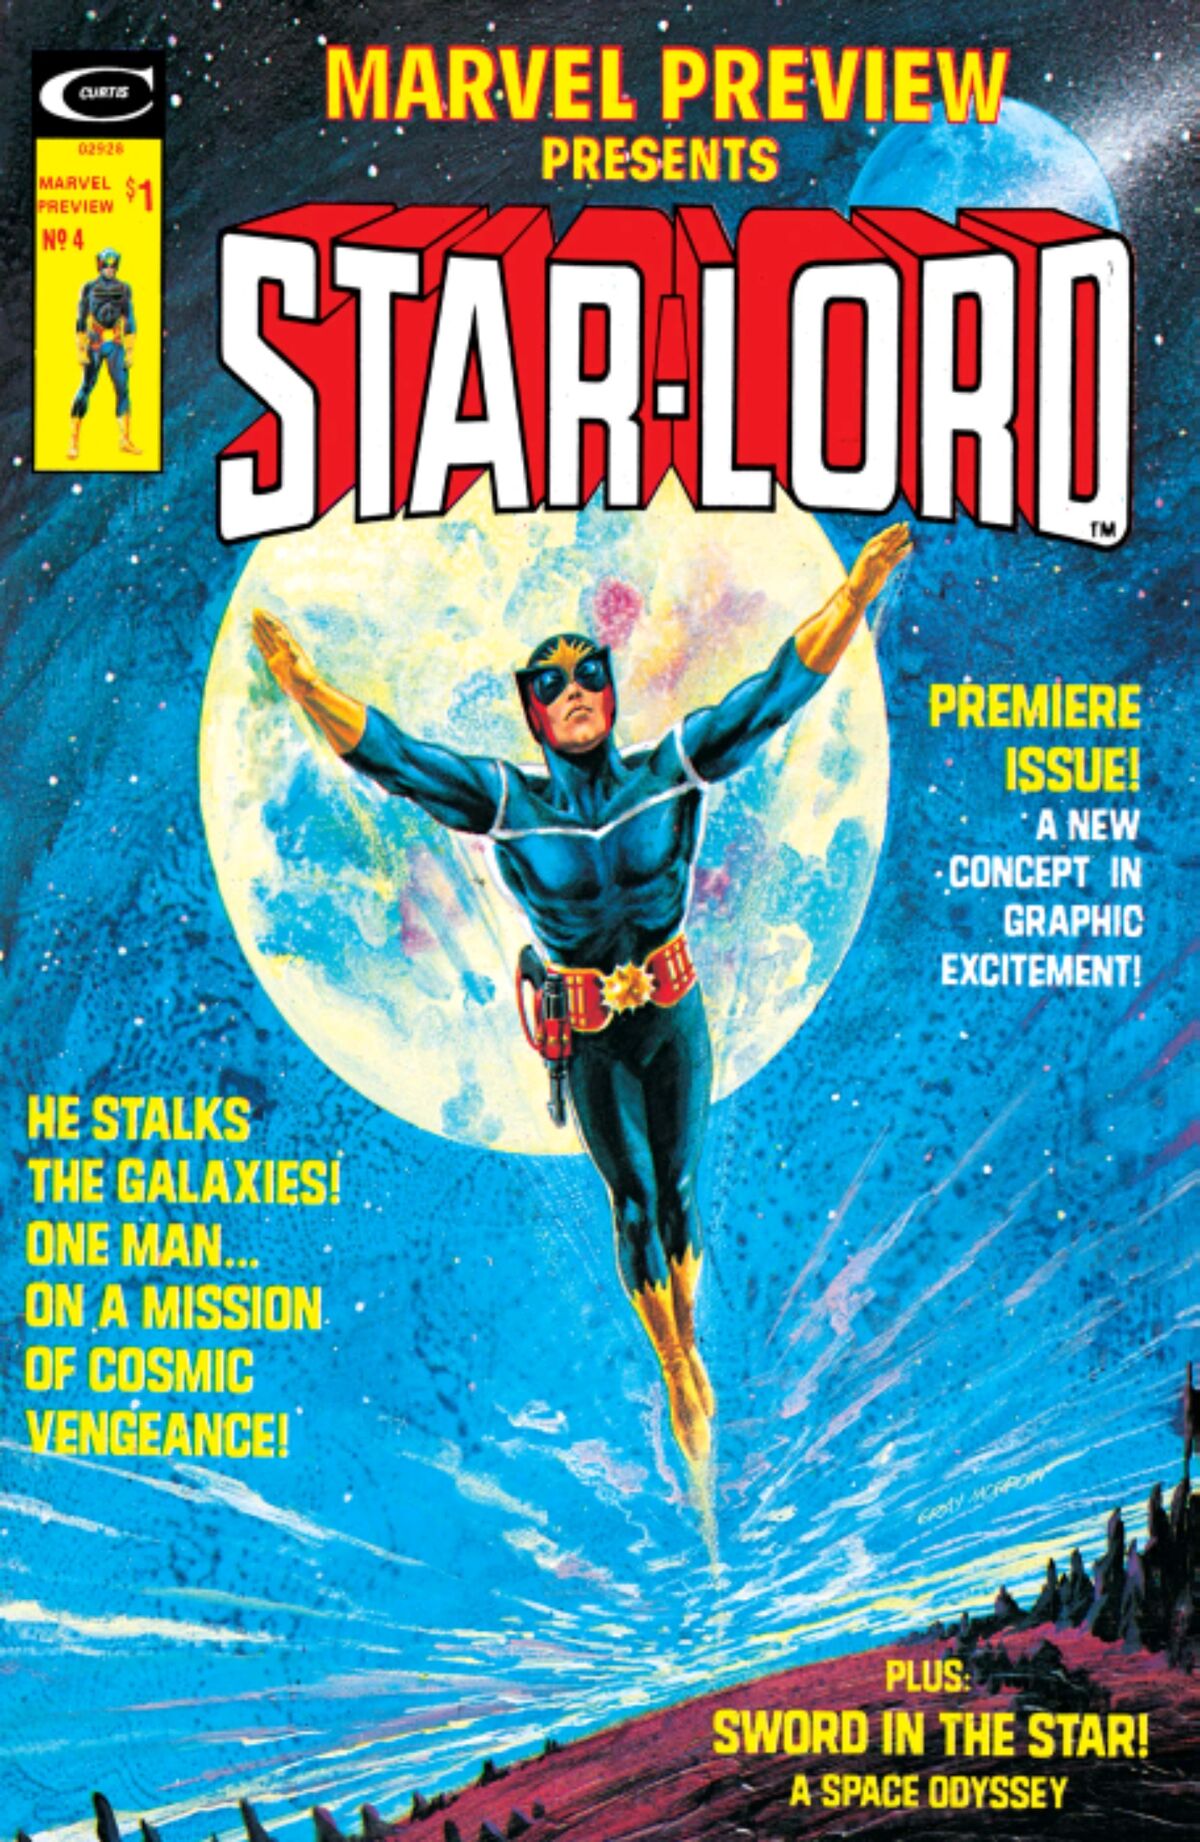 Legendary Star-Lord (2014) #4, Comic Issues